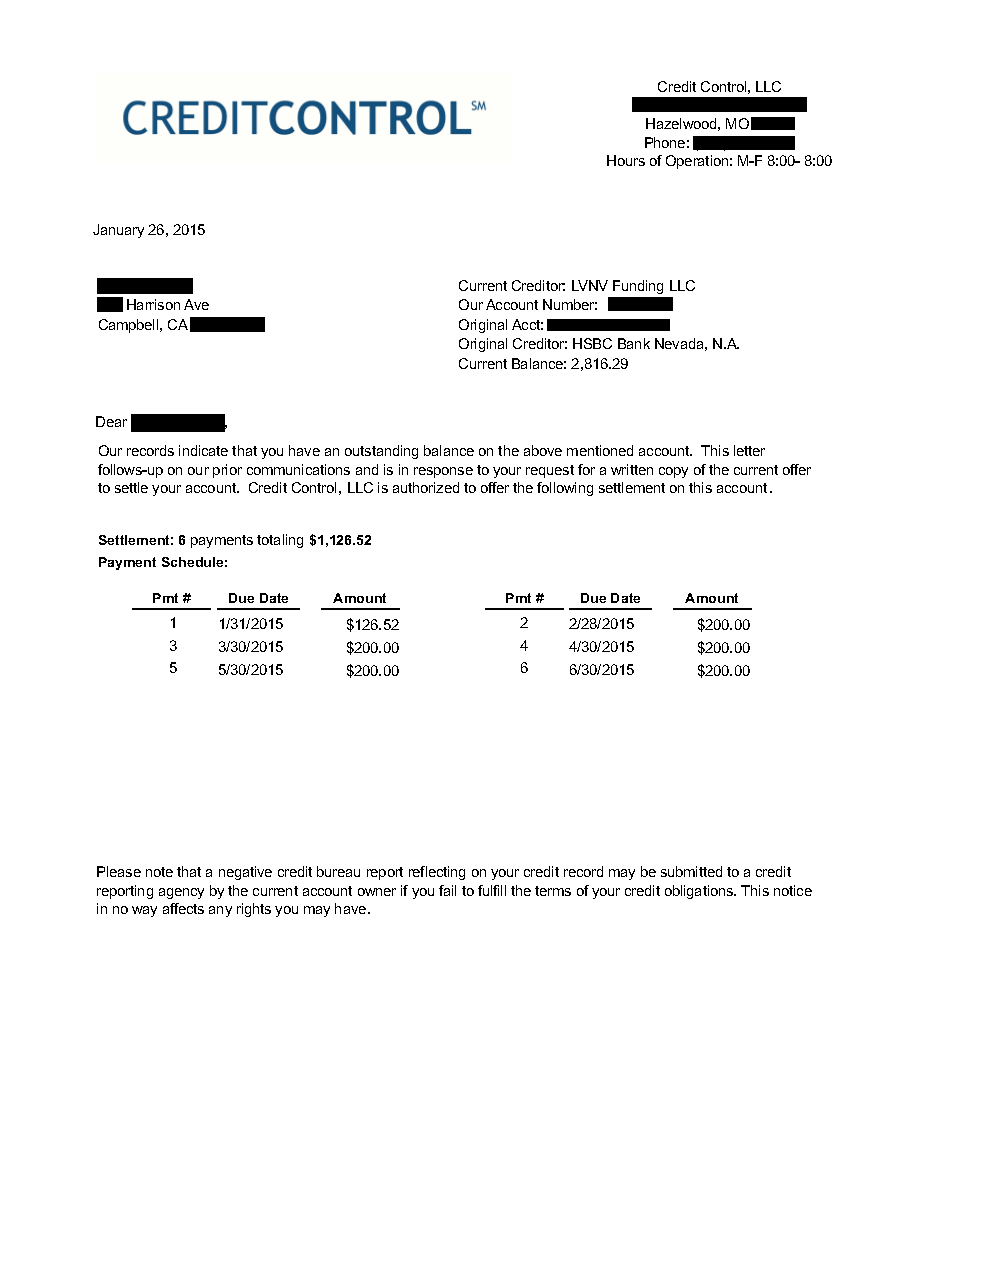 Client SP from CA saved $6,463